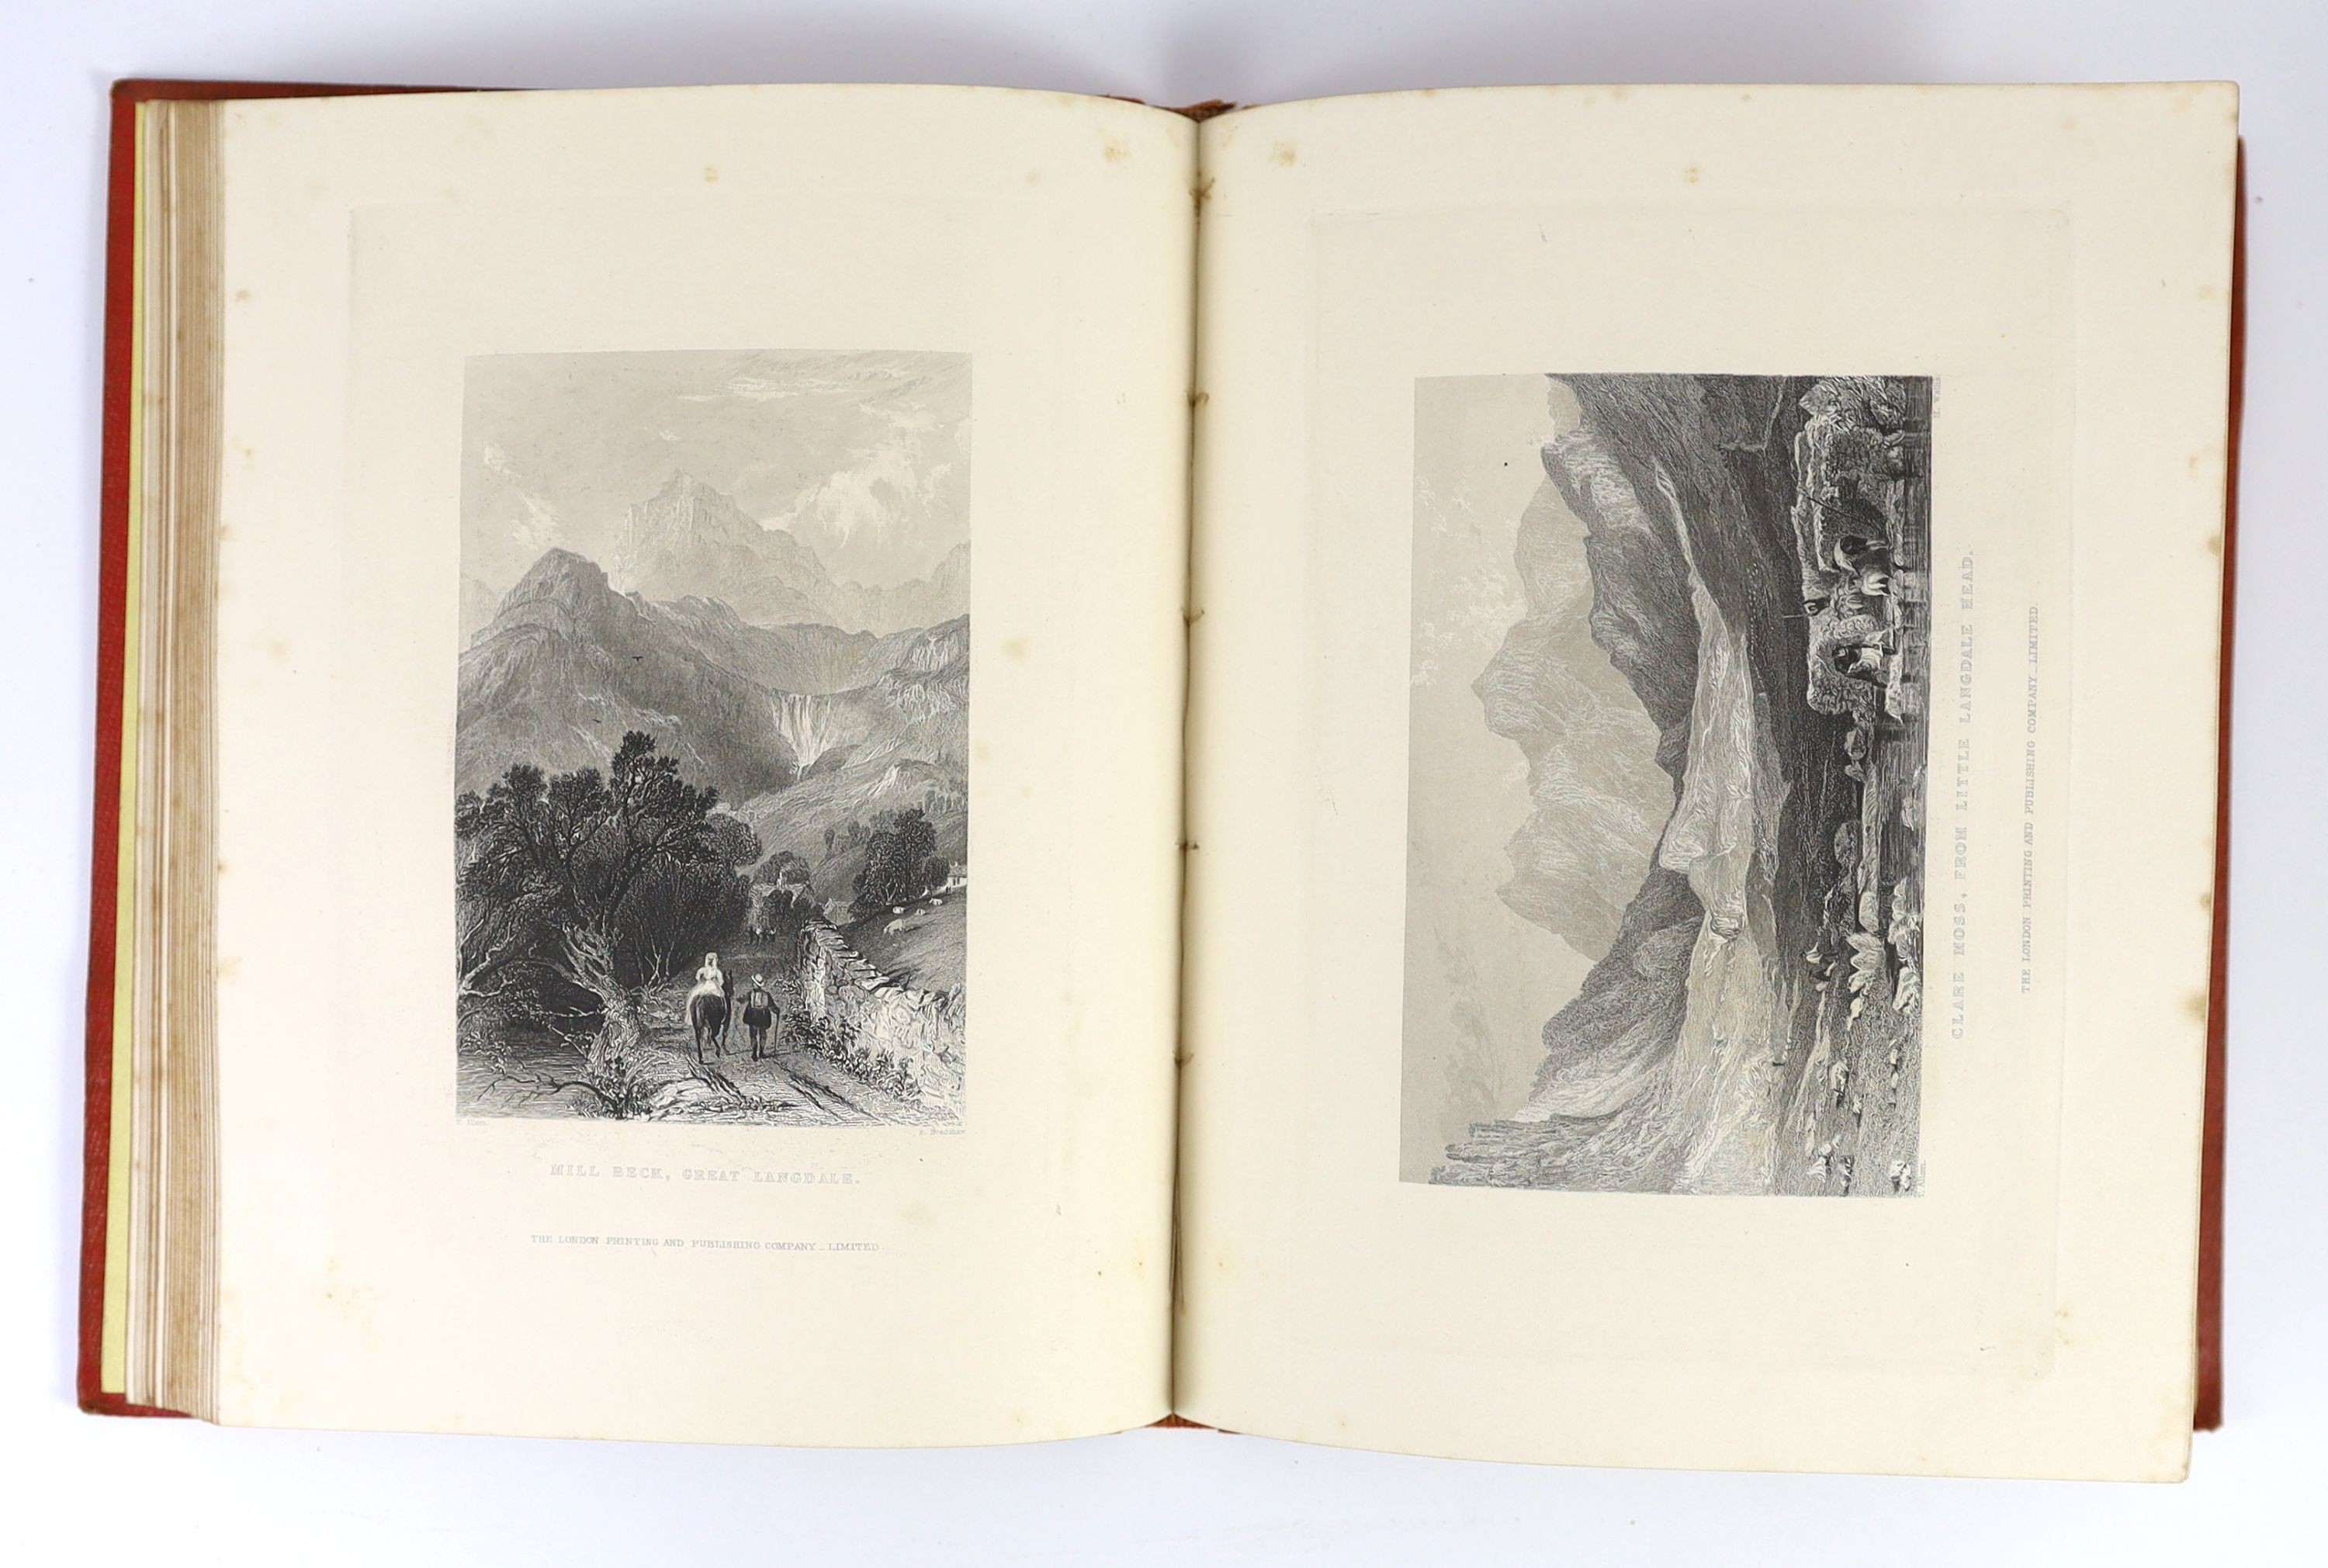 Rose, Thomas, Topographer - The British Switzerland, or, Picturesque Rambles in the Lake Dustrict, illustrated by Thomas Allom and others, 2 vols, 4to, red cloth gilt, with 87 engraved plates and a folding map, London, [